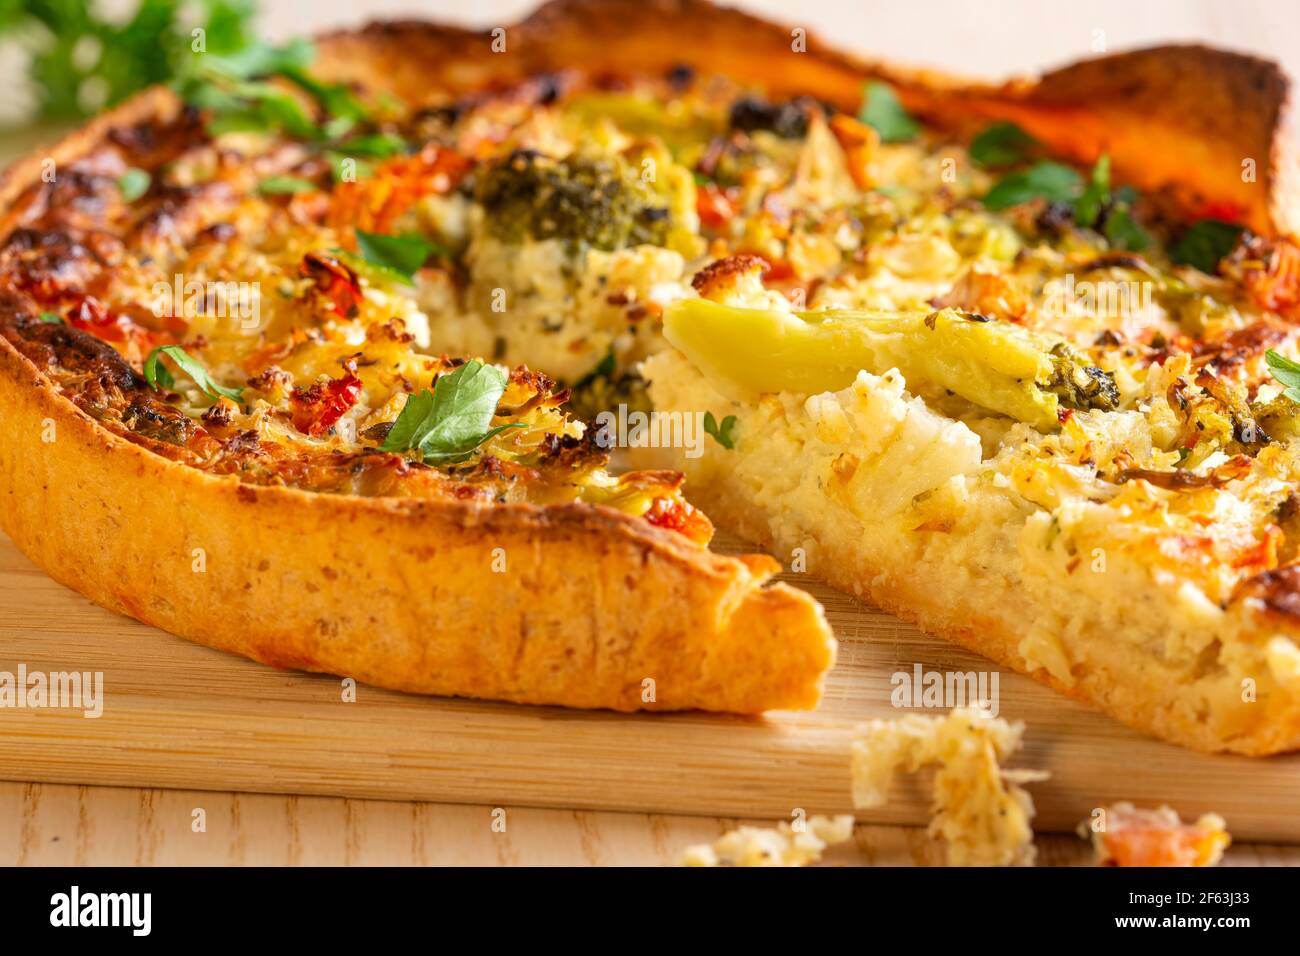 Homemade quiche with vegetables - close up view Stock Photo